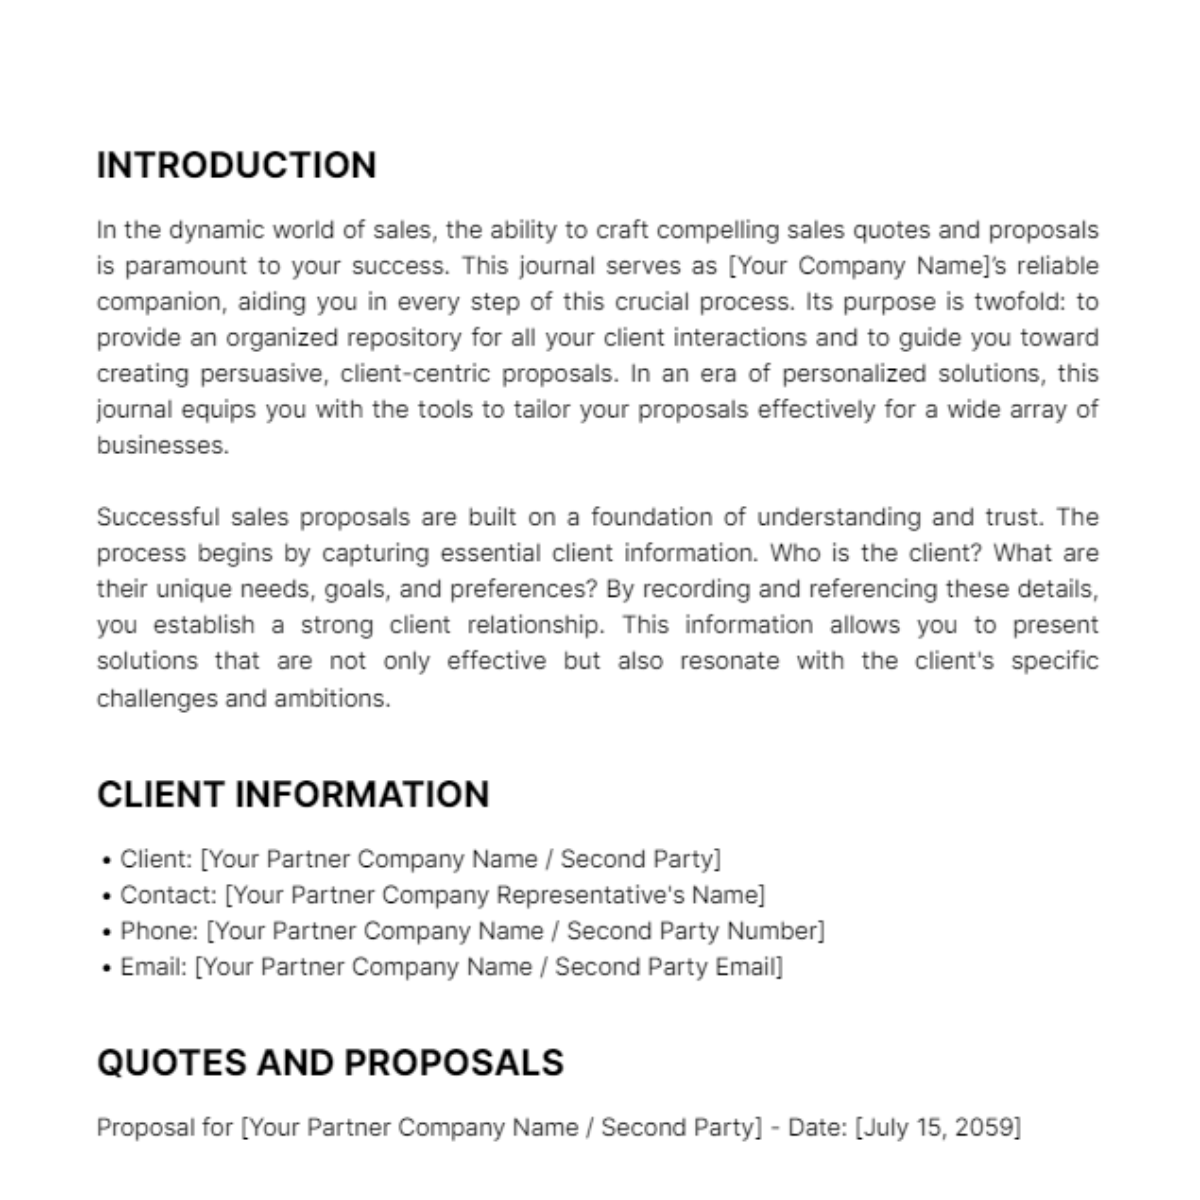 Free Sales Quote and Proposal Journal Template